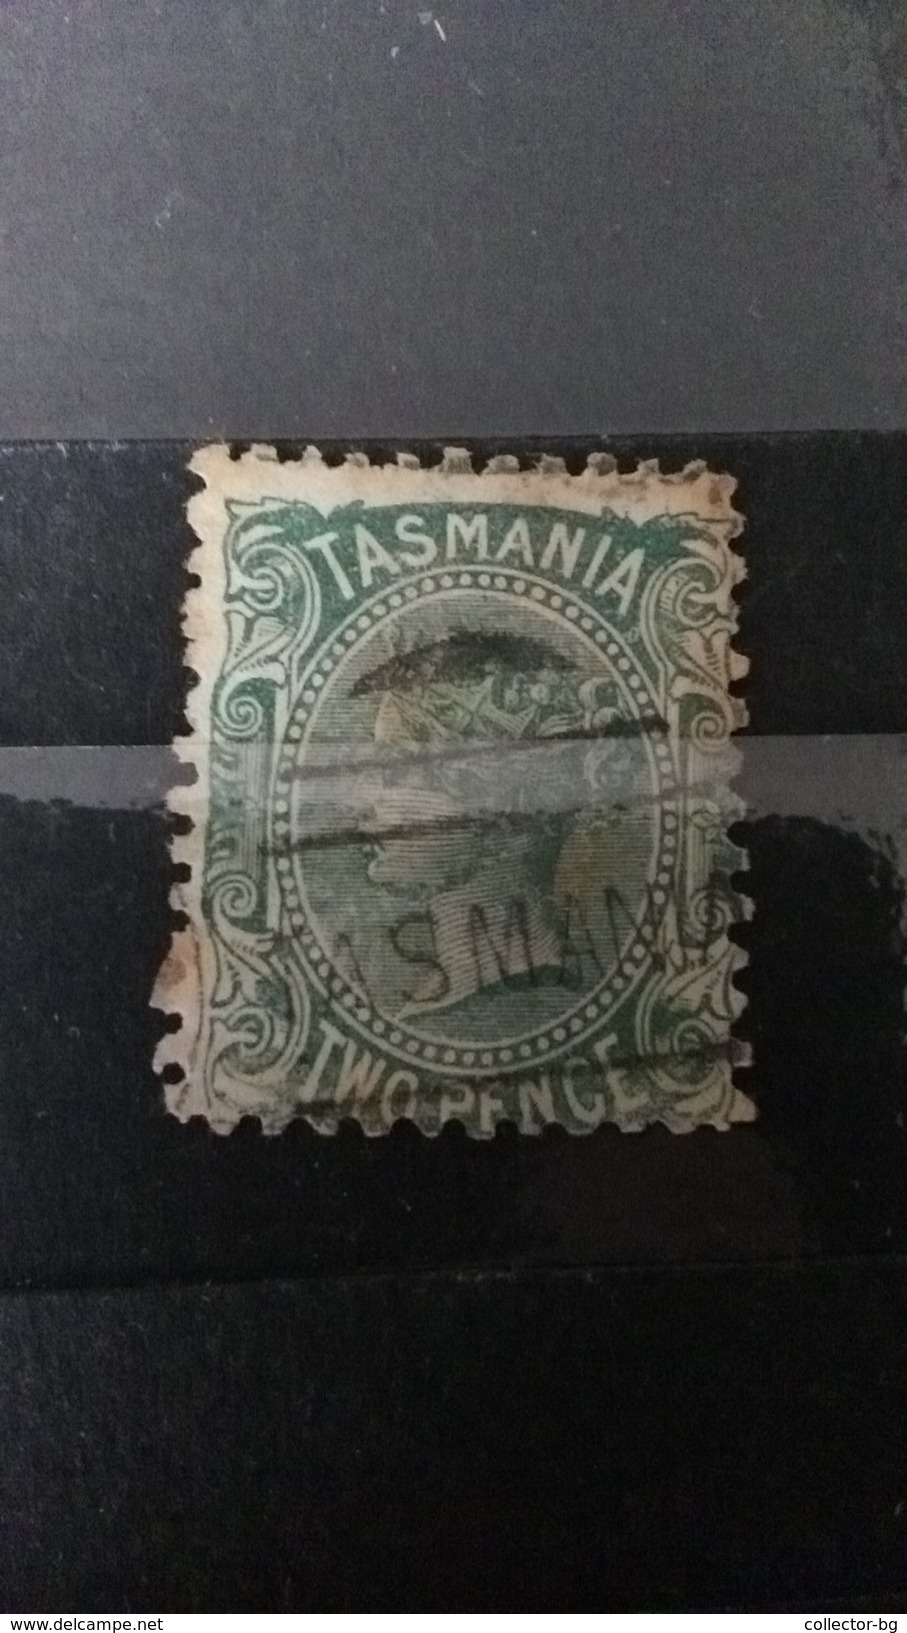 RARE 1870-1900 TWO PENCE QUEEN VICTORIA GREEN WATERMARK SEAL "TASMANIA"  USED  STAMP TIMBRE - Used Stamps